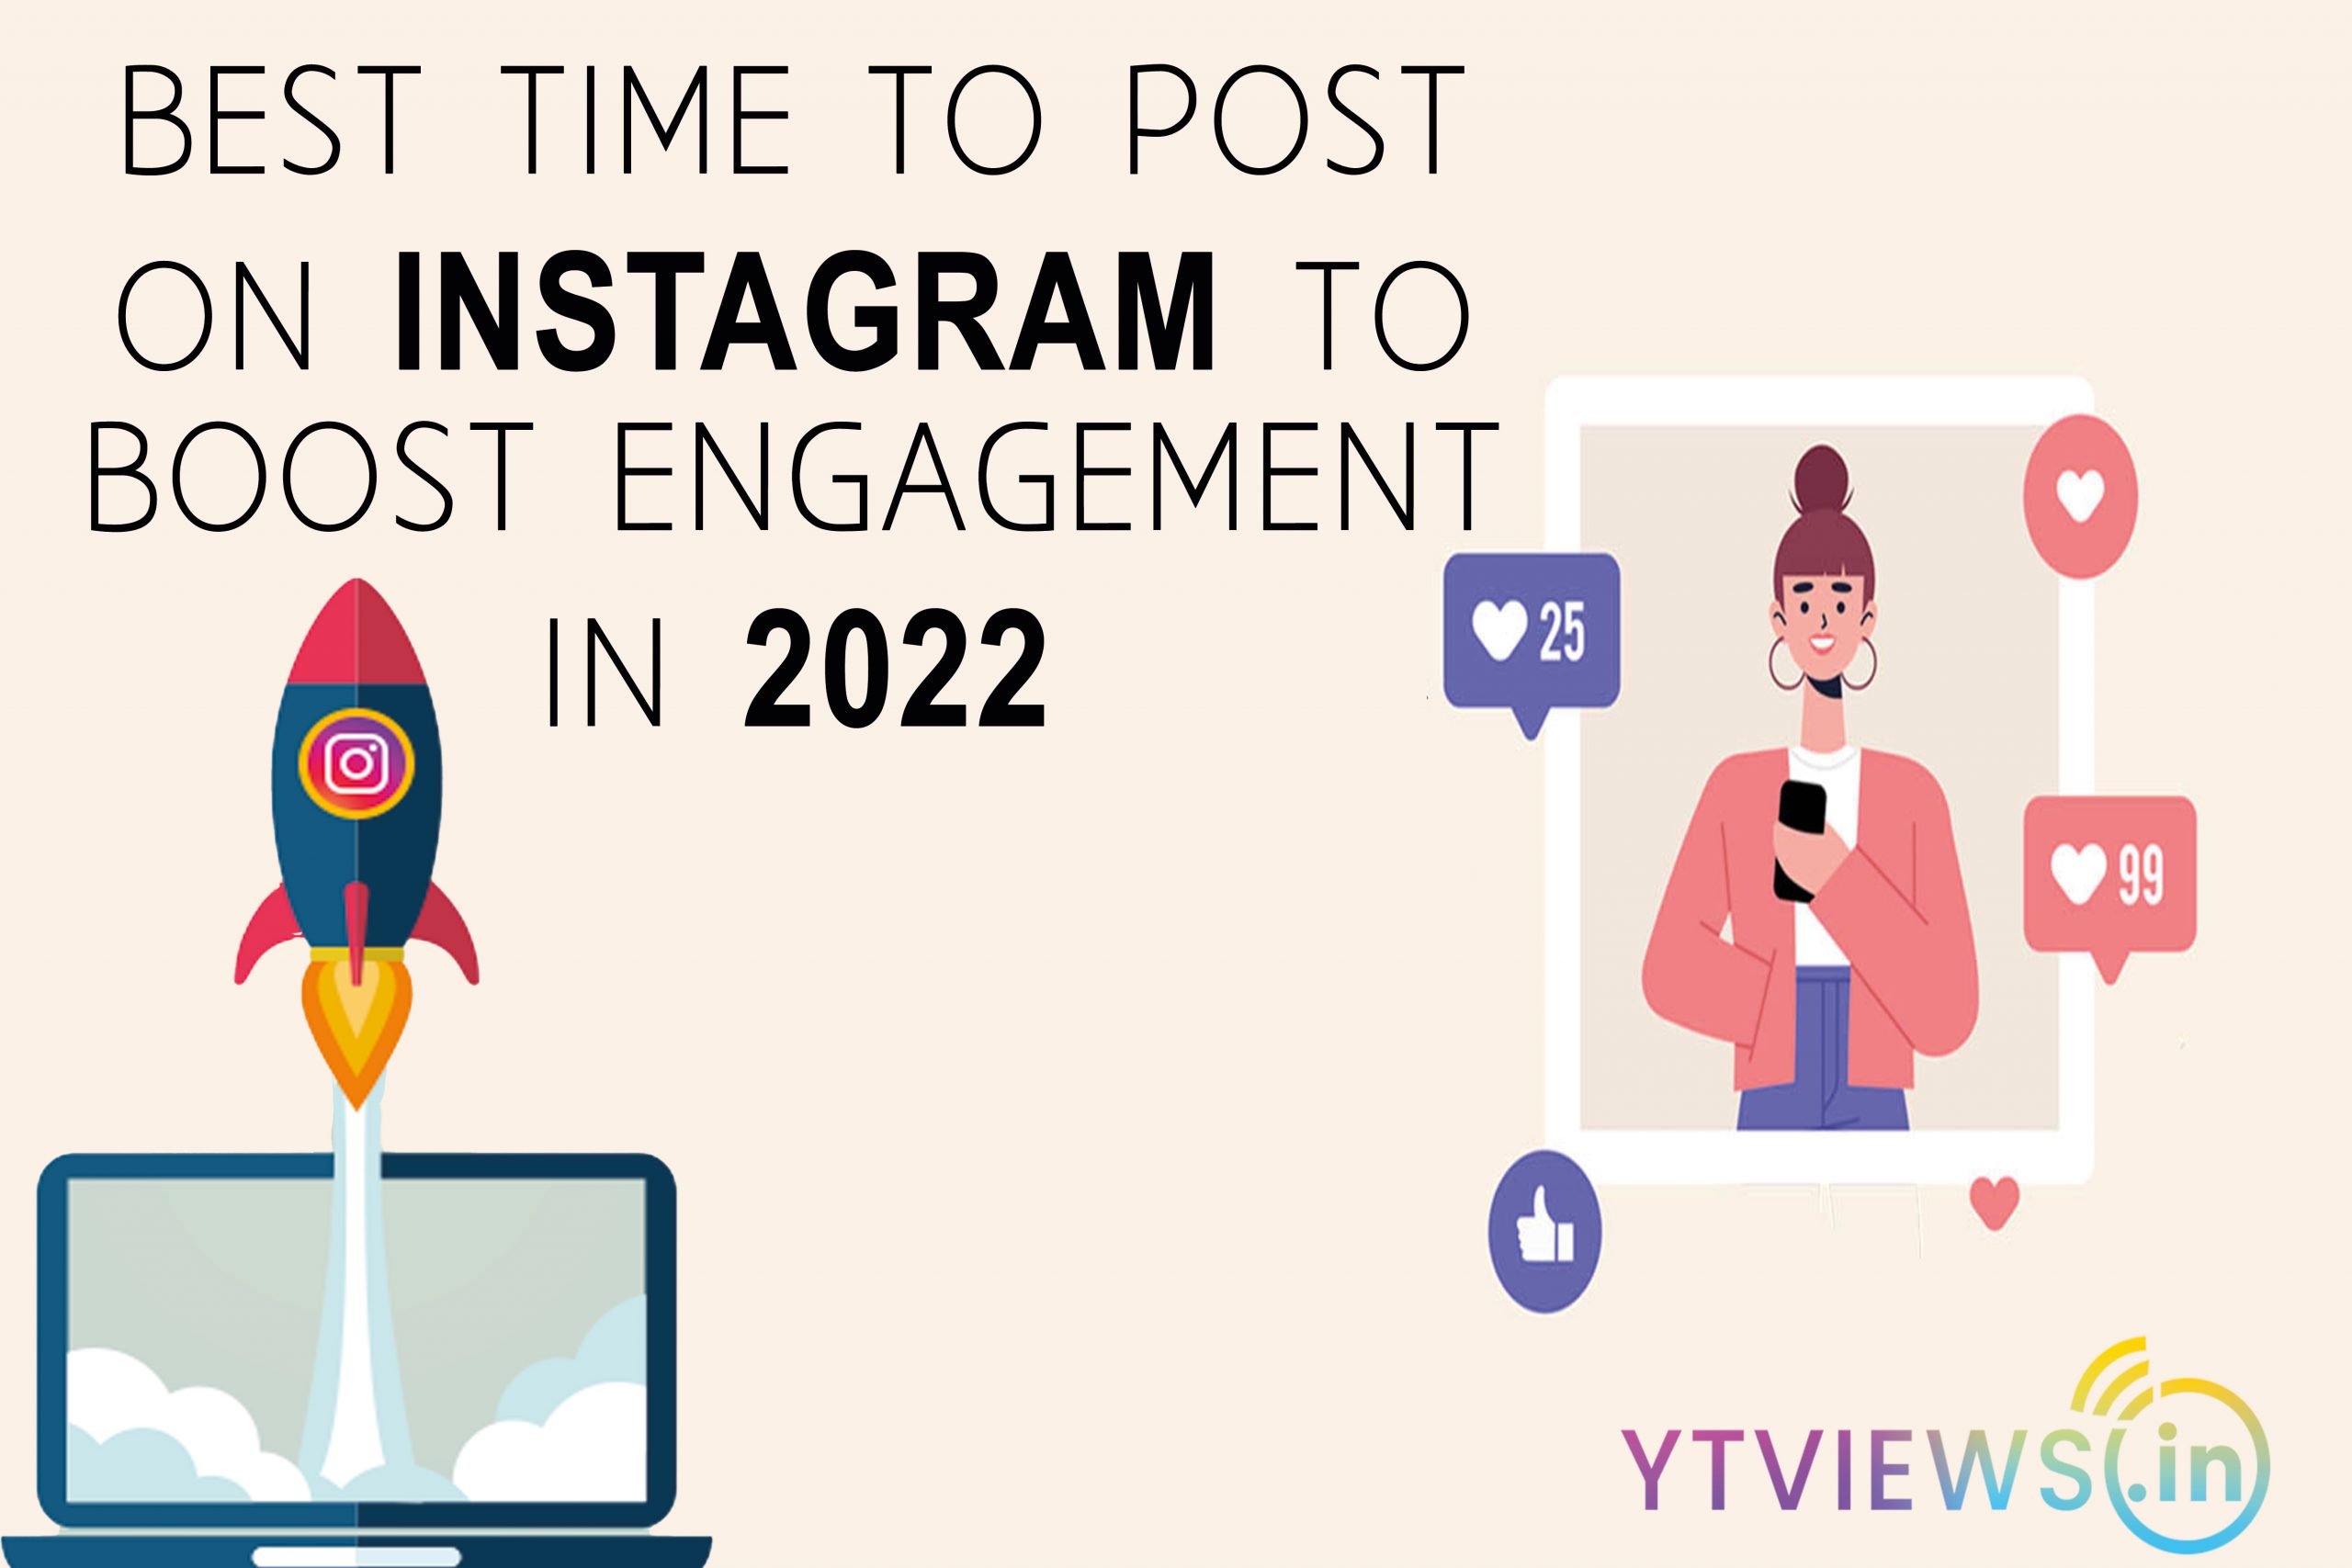 Best time to post on Instagram to boost engagement in 2022